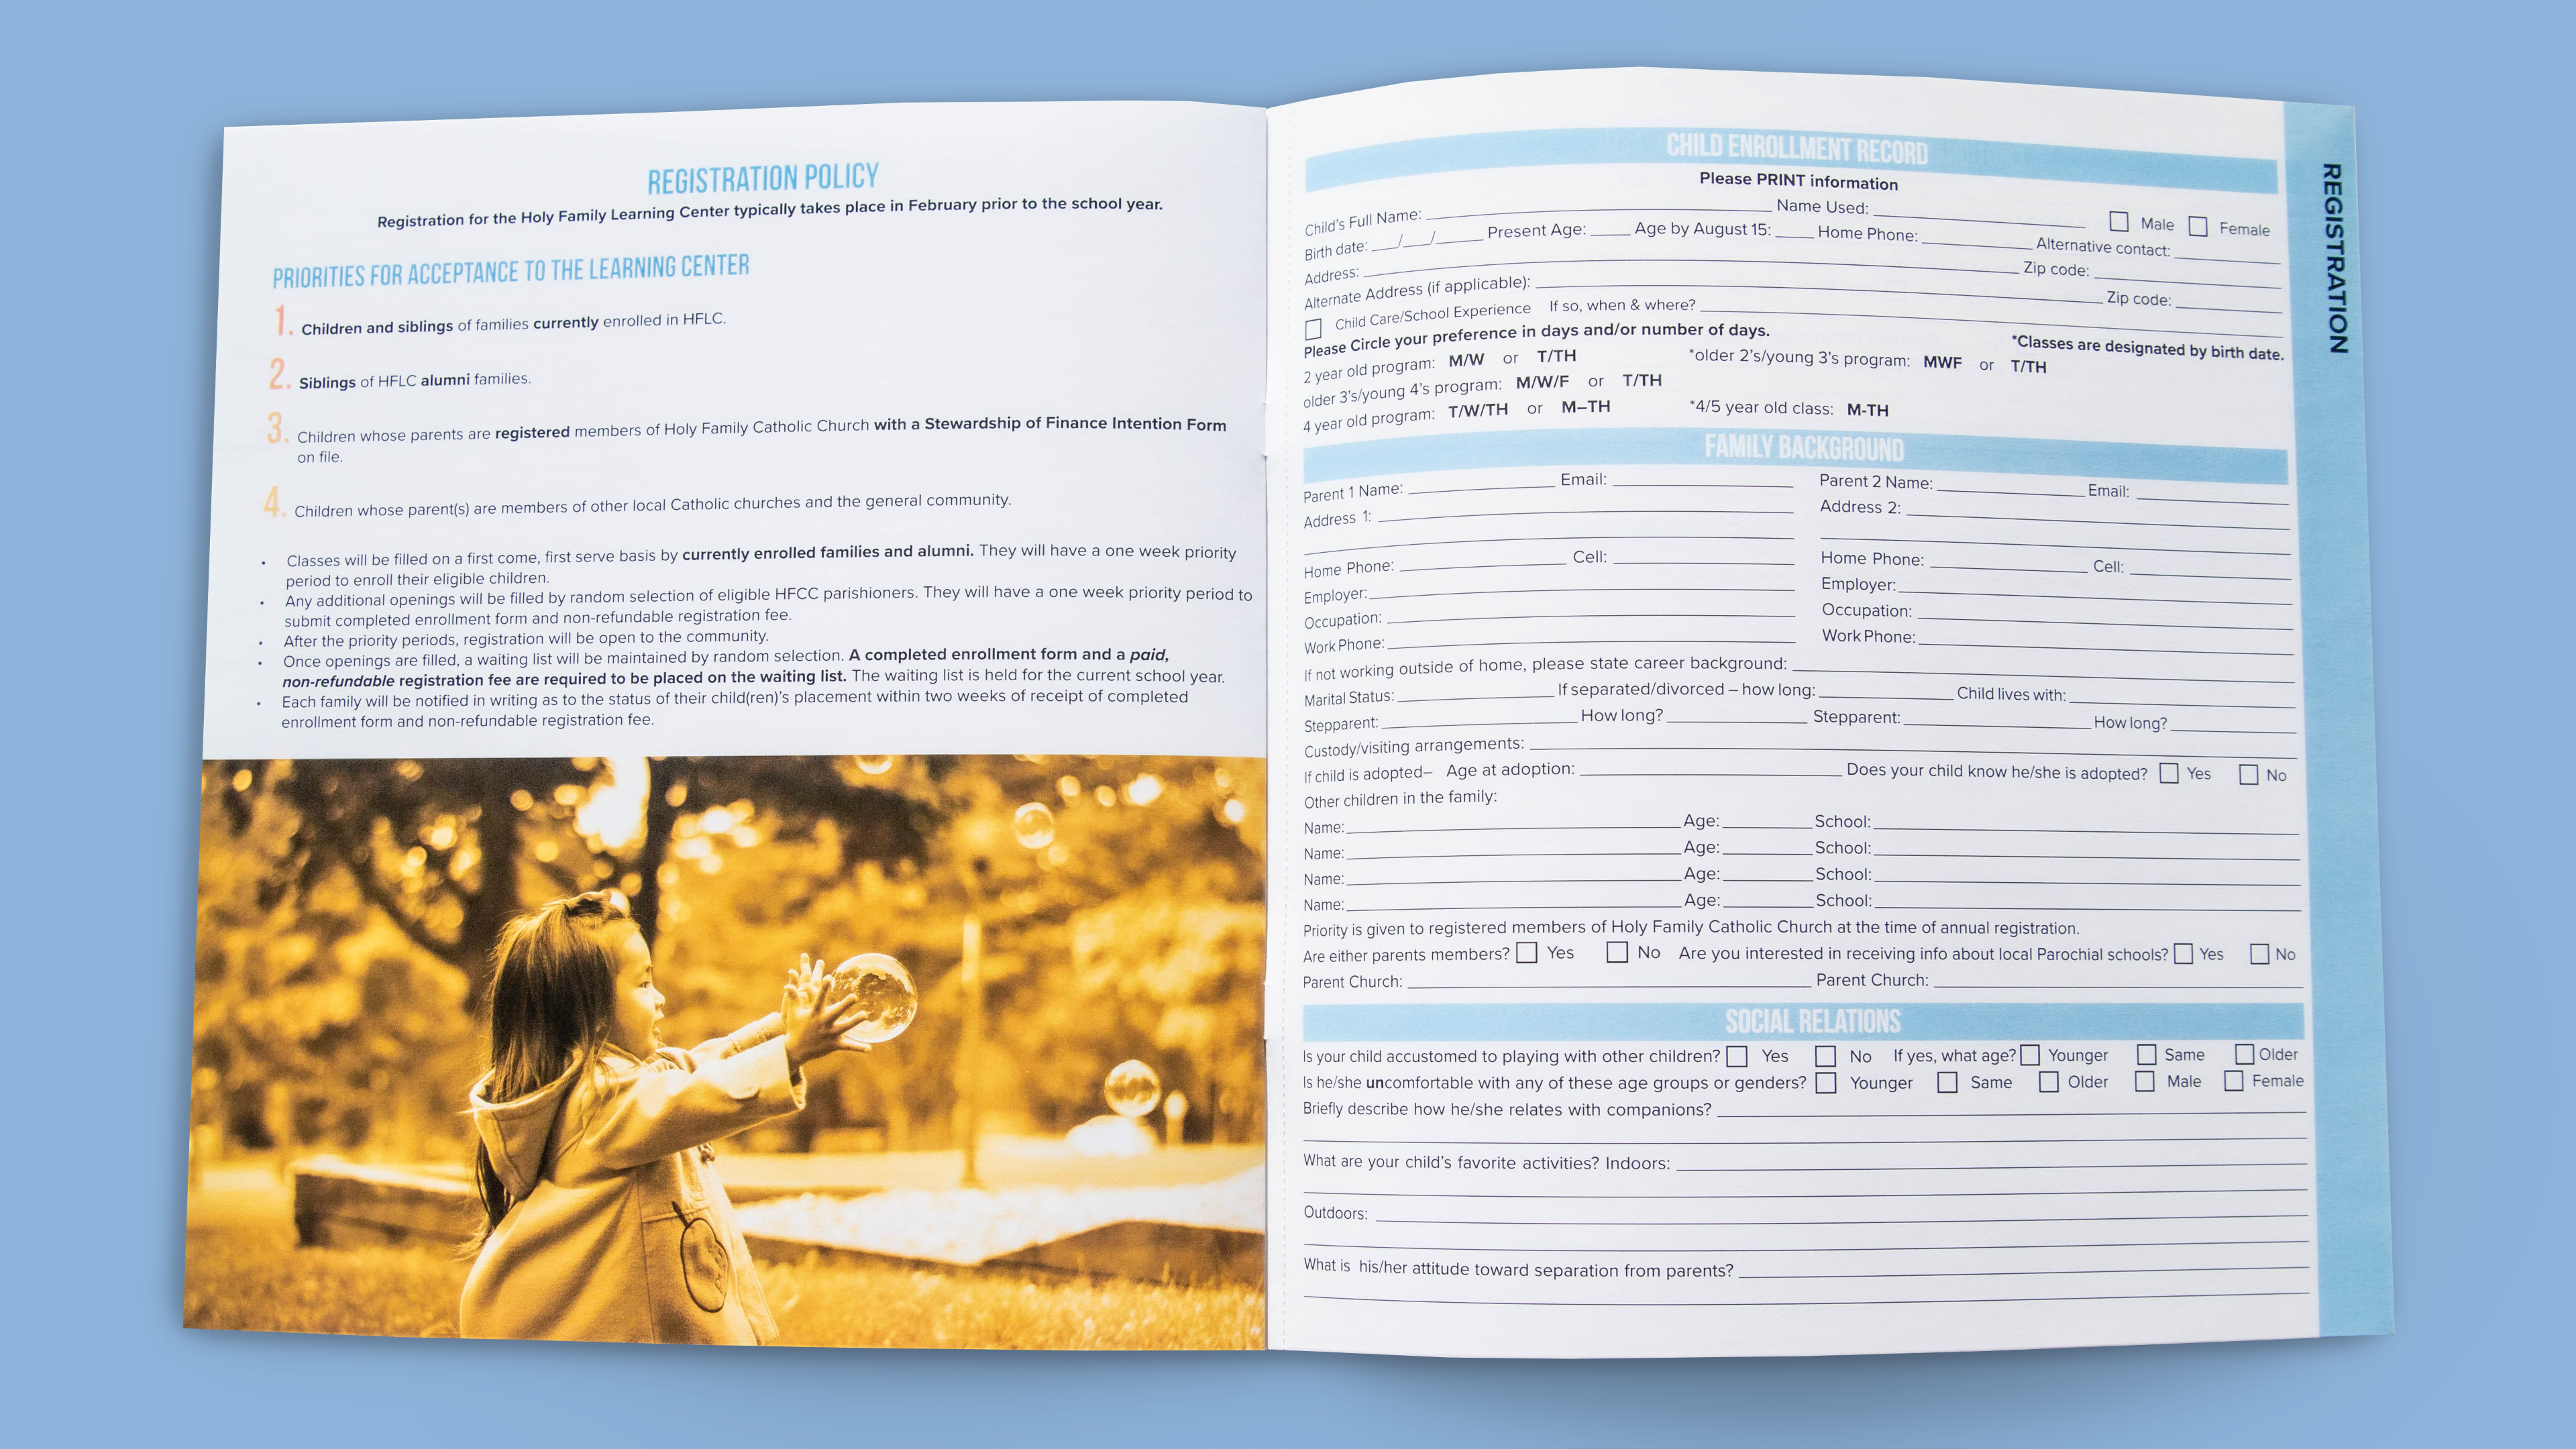 The final page of the tabbed brochure with the registration and policy details